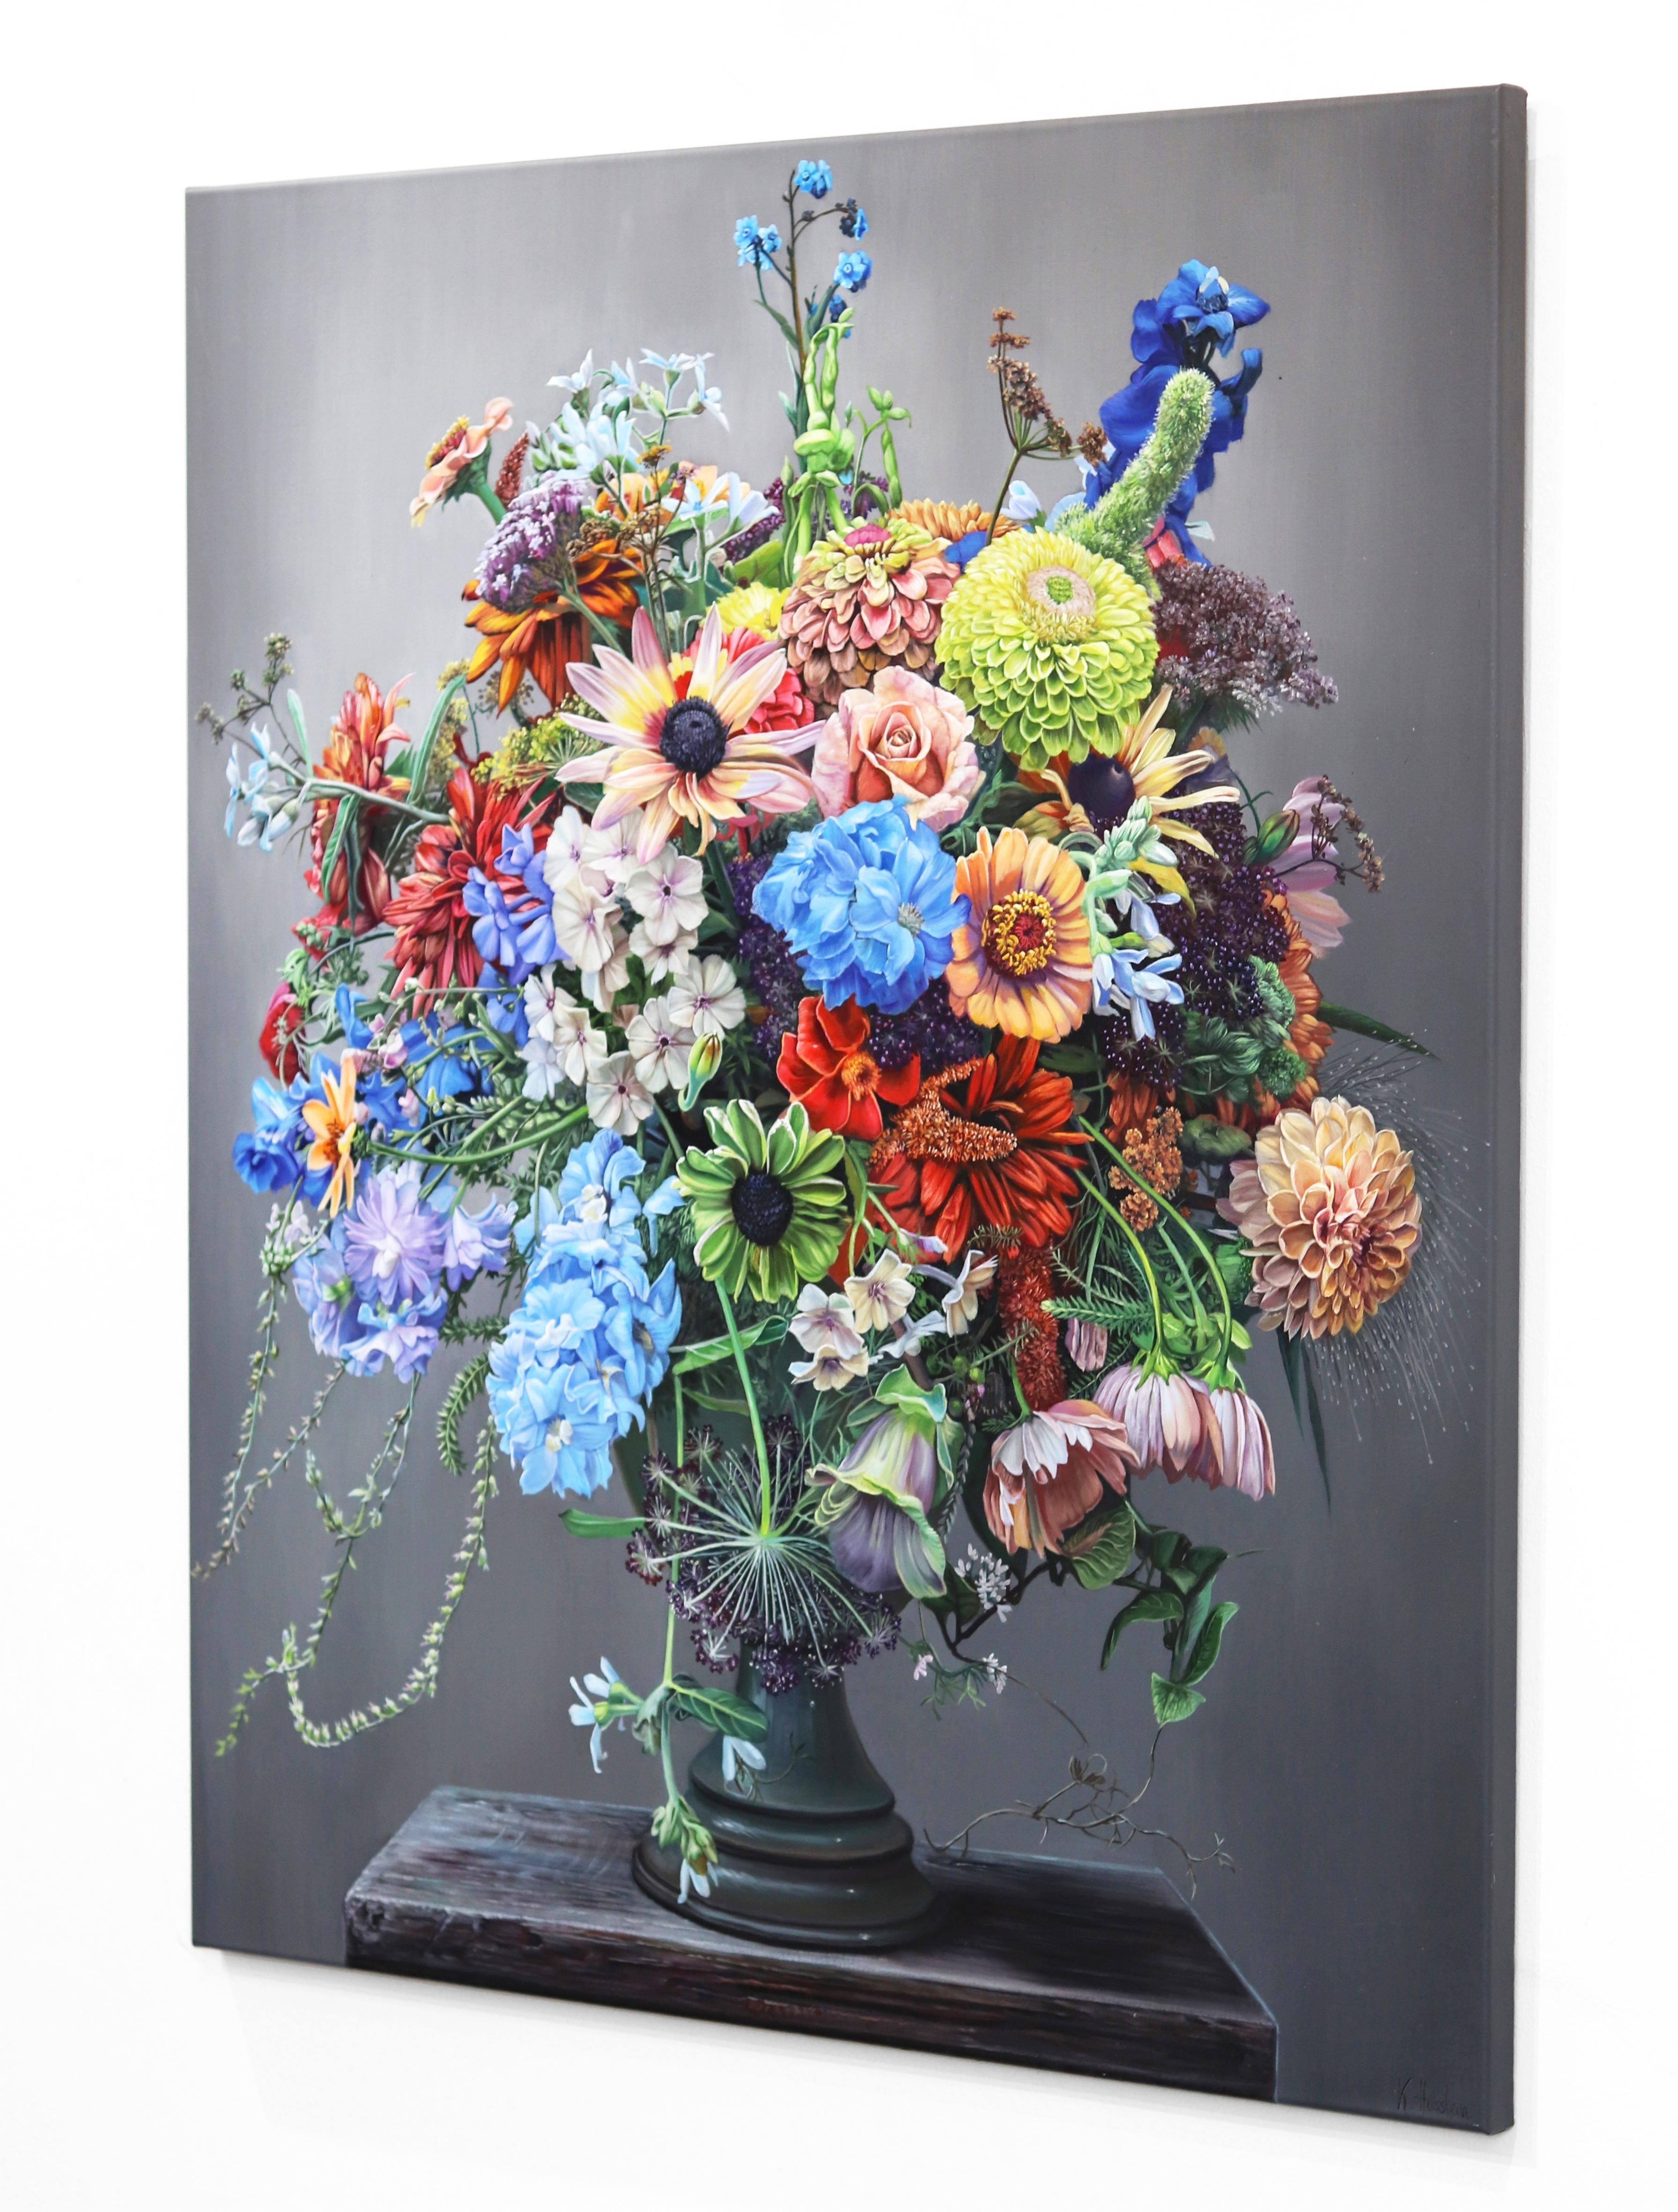 Inspired by paintings created by old masters and the immersive nature she experienced in the Black Forest, German artist Katharina Husslein paints in a representational hyperrealistic manner to capture lively bouquets and saturated landscapes.